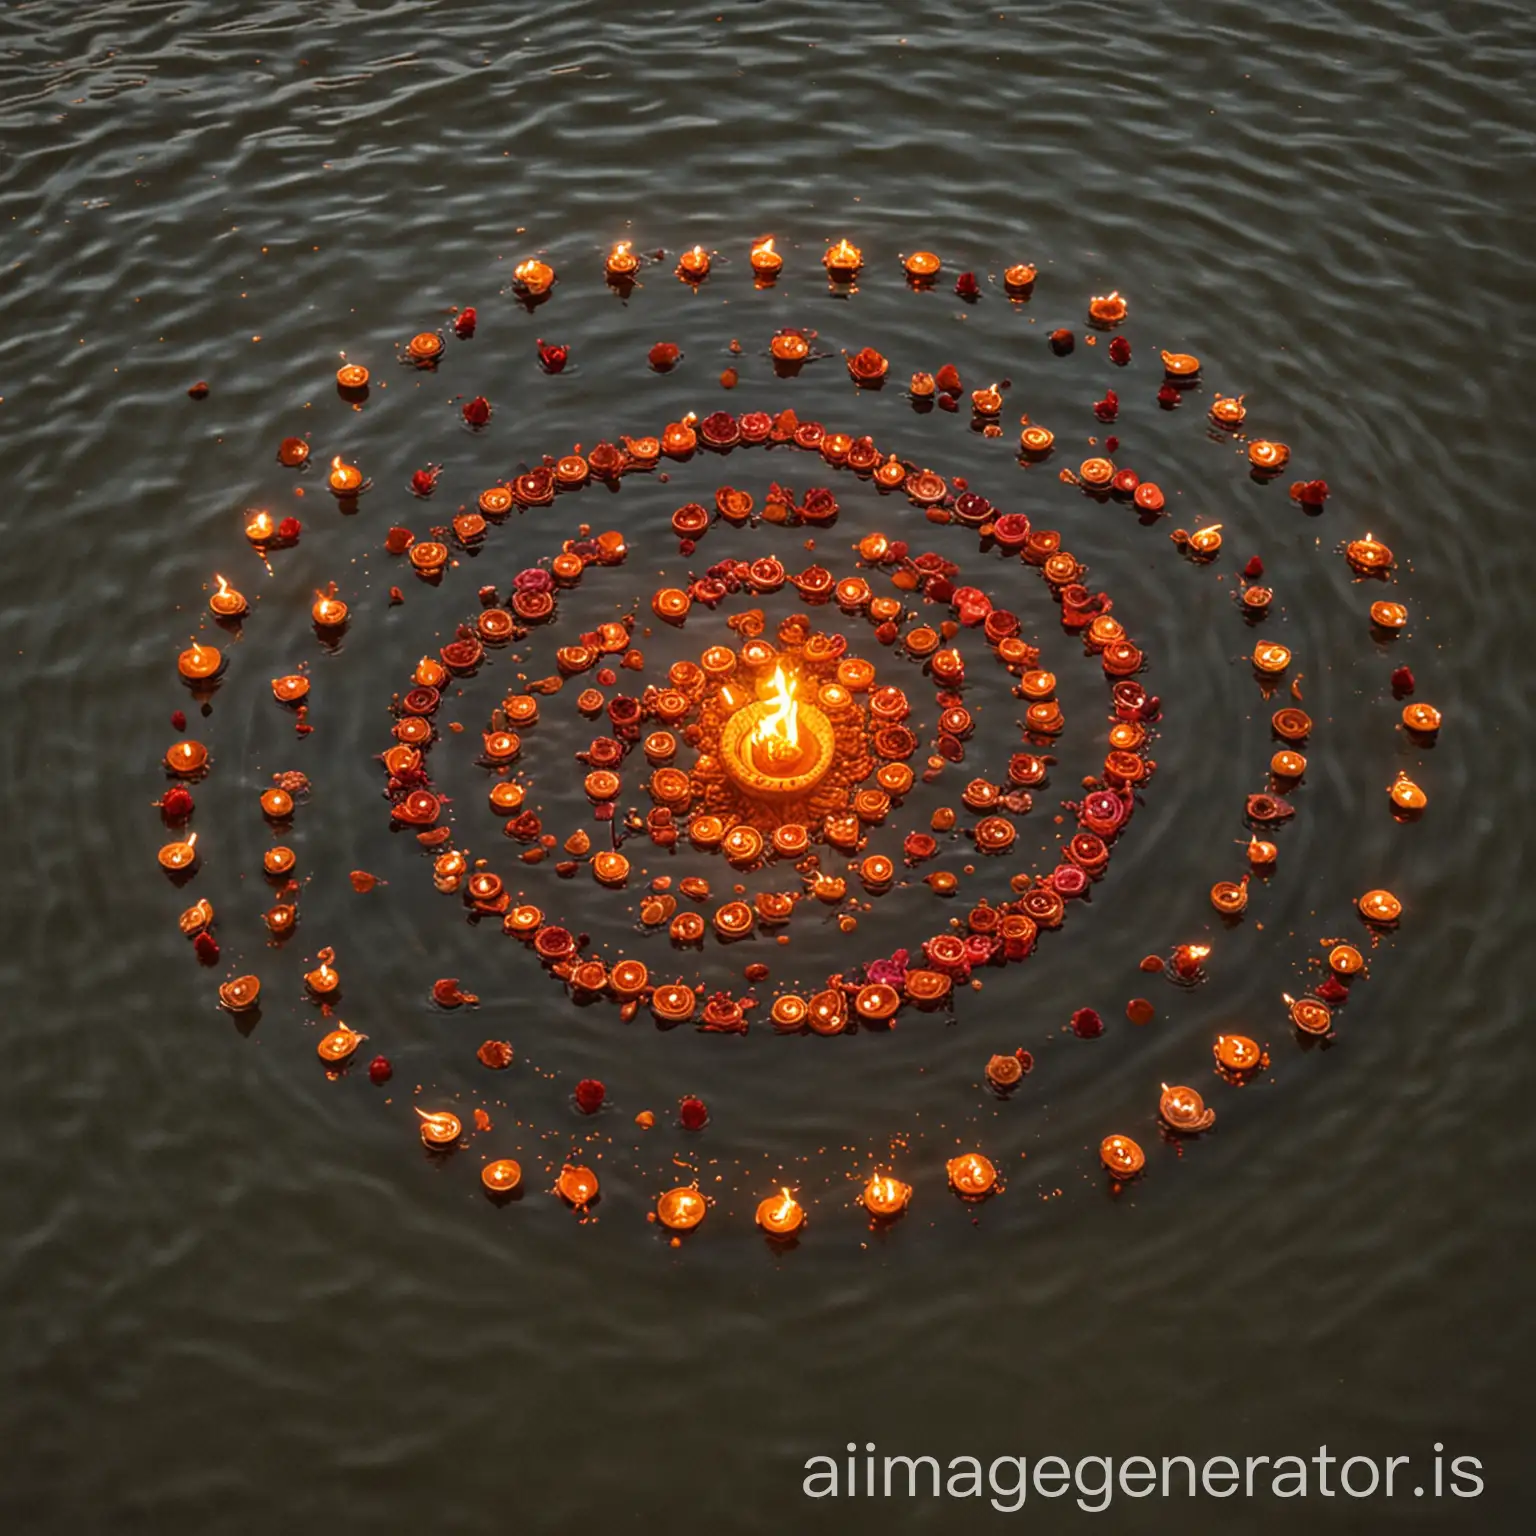 Generate an image where there are Diya’s in the river Ganga with peace as its symbol at the maha kumbh mela